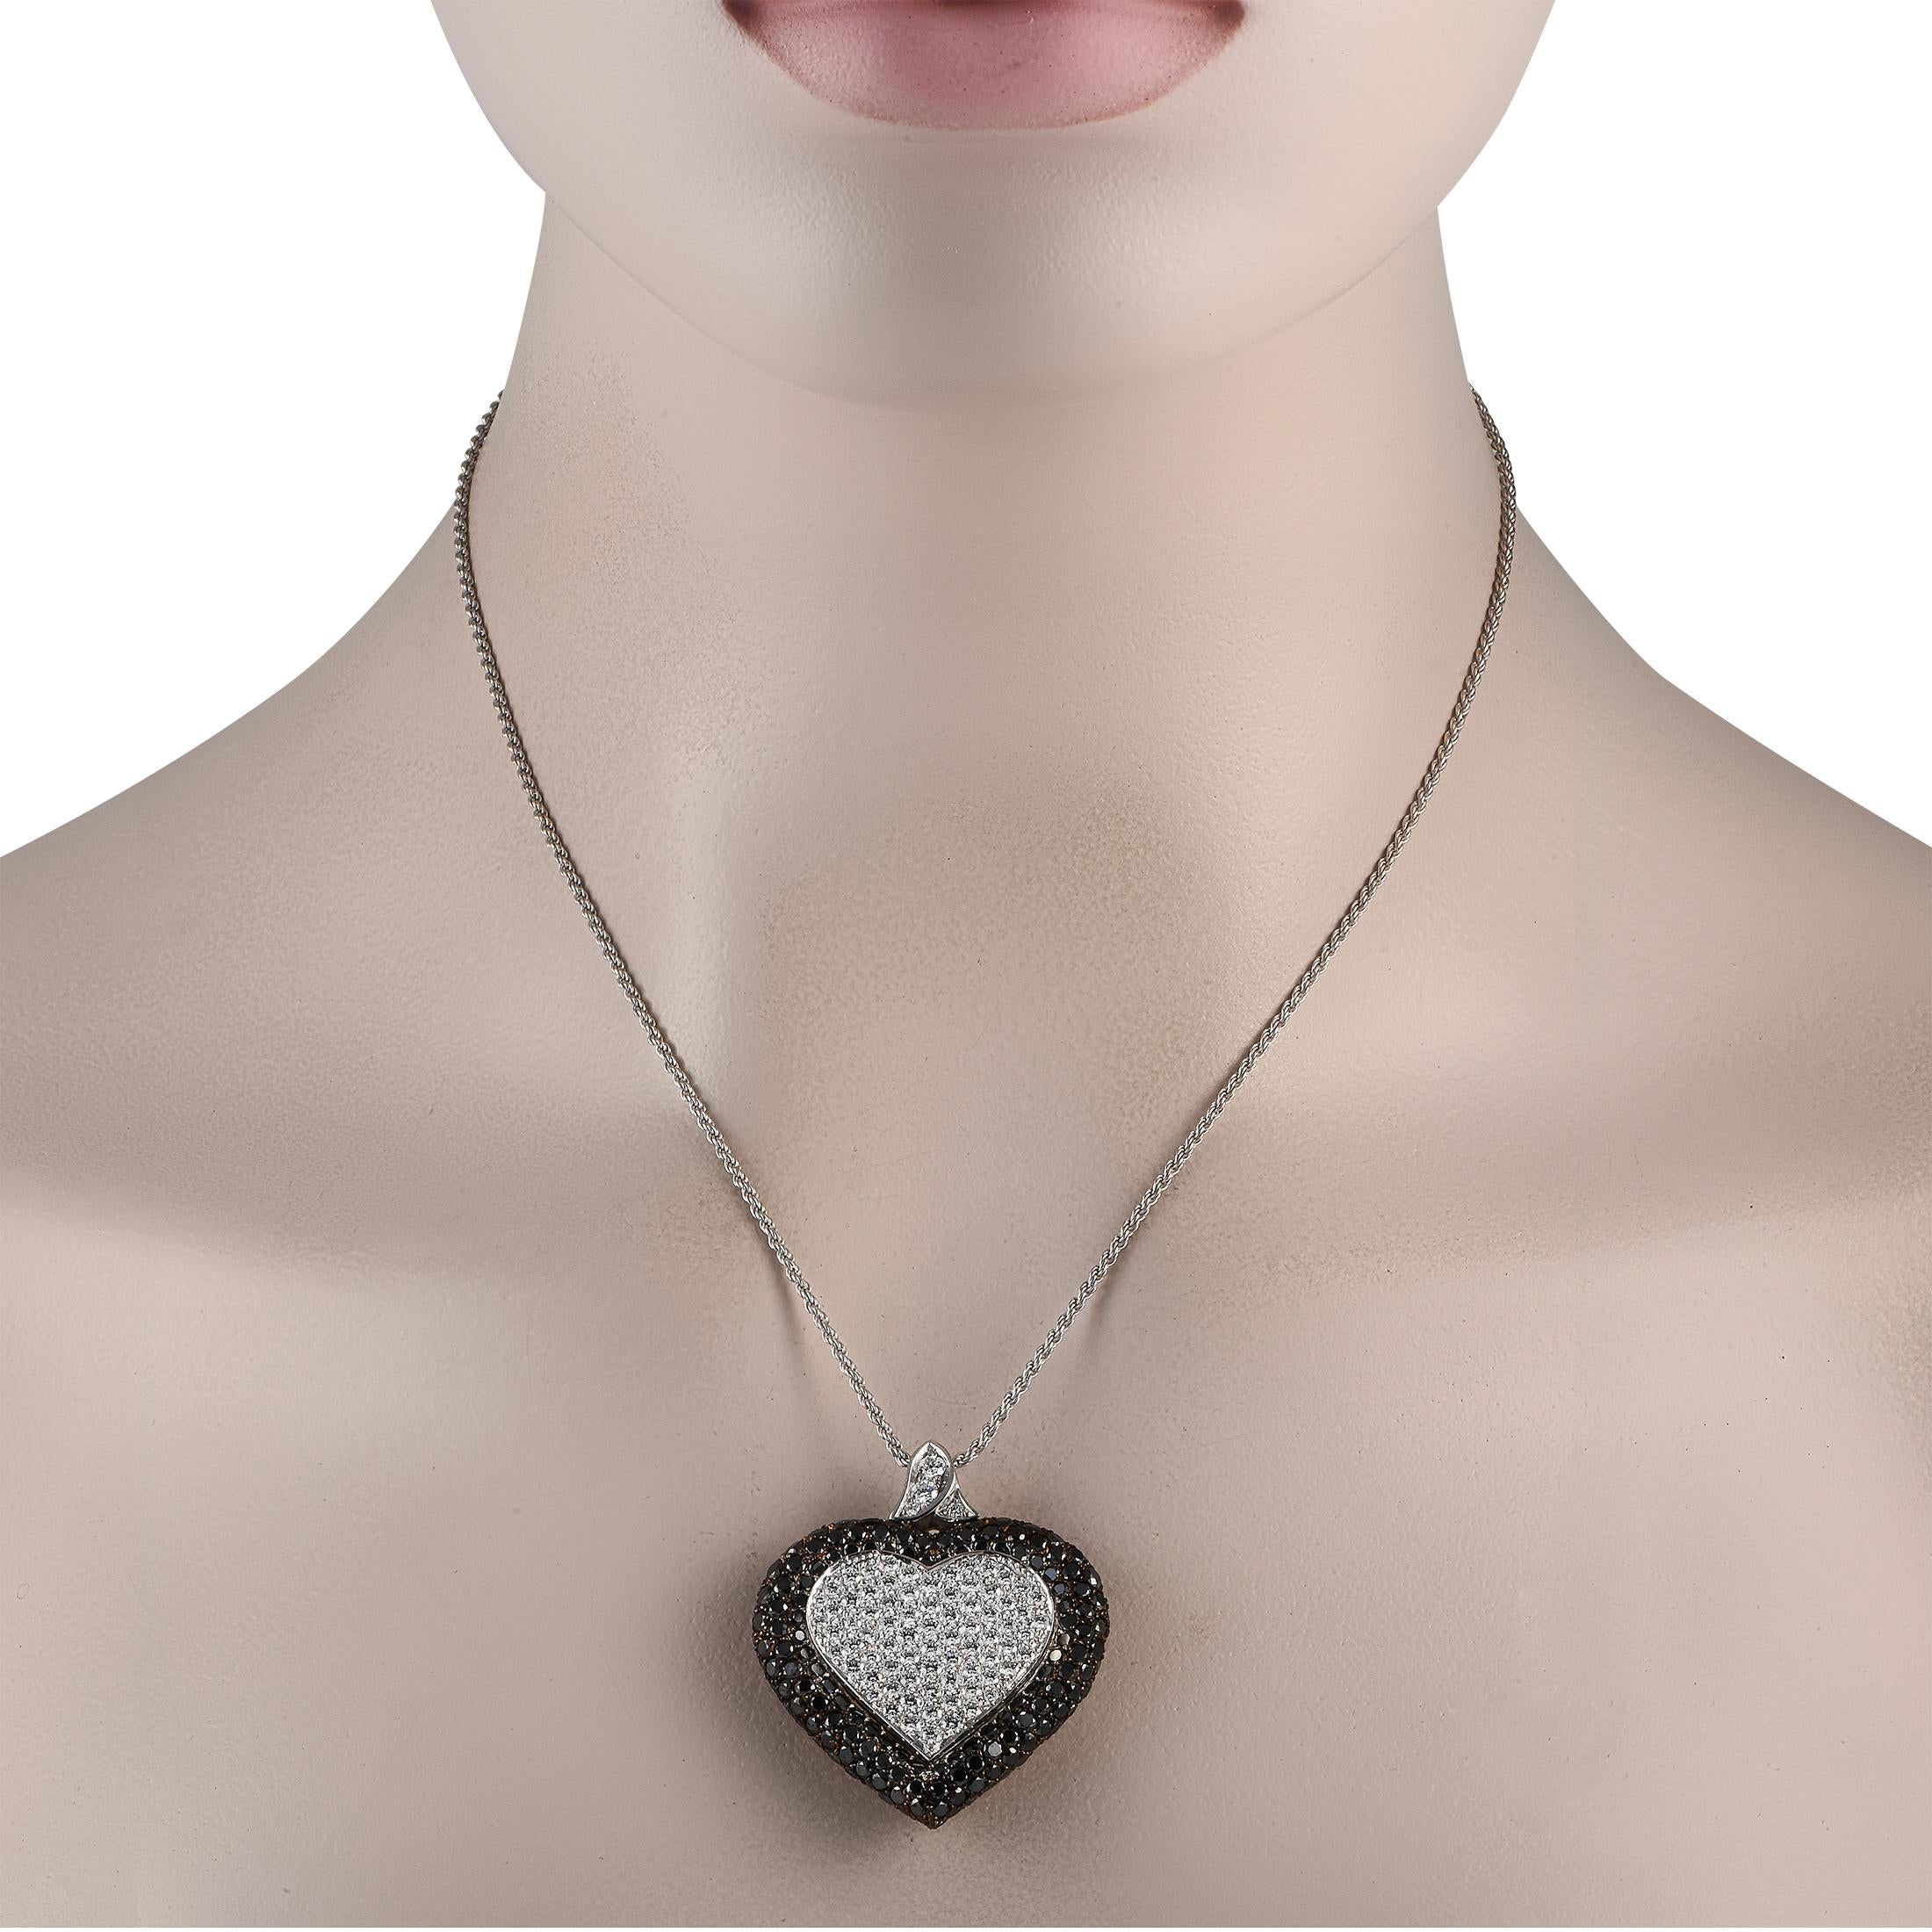 This exquisite creation by Graff is a testament to the British jeweler's exceptional craftsmanship and the high quality of its diamonds. The necklace features a heart-shaped pendant measuring 1.75 inches by 1.5 inches, decorated with a combination